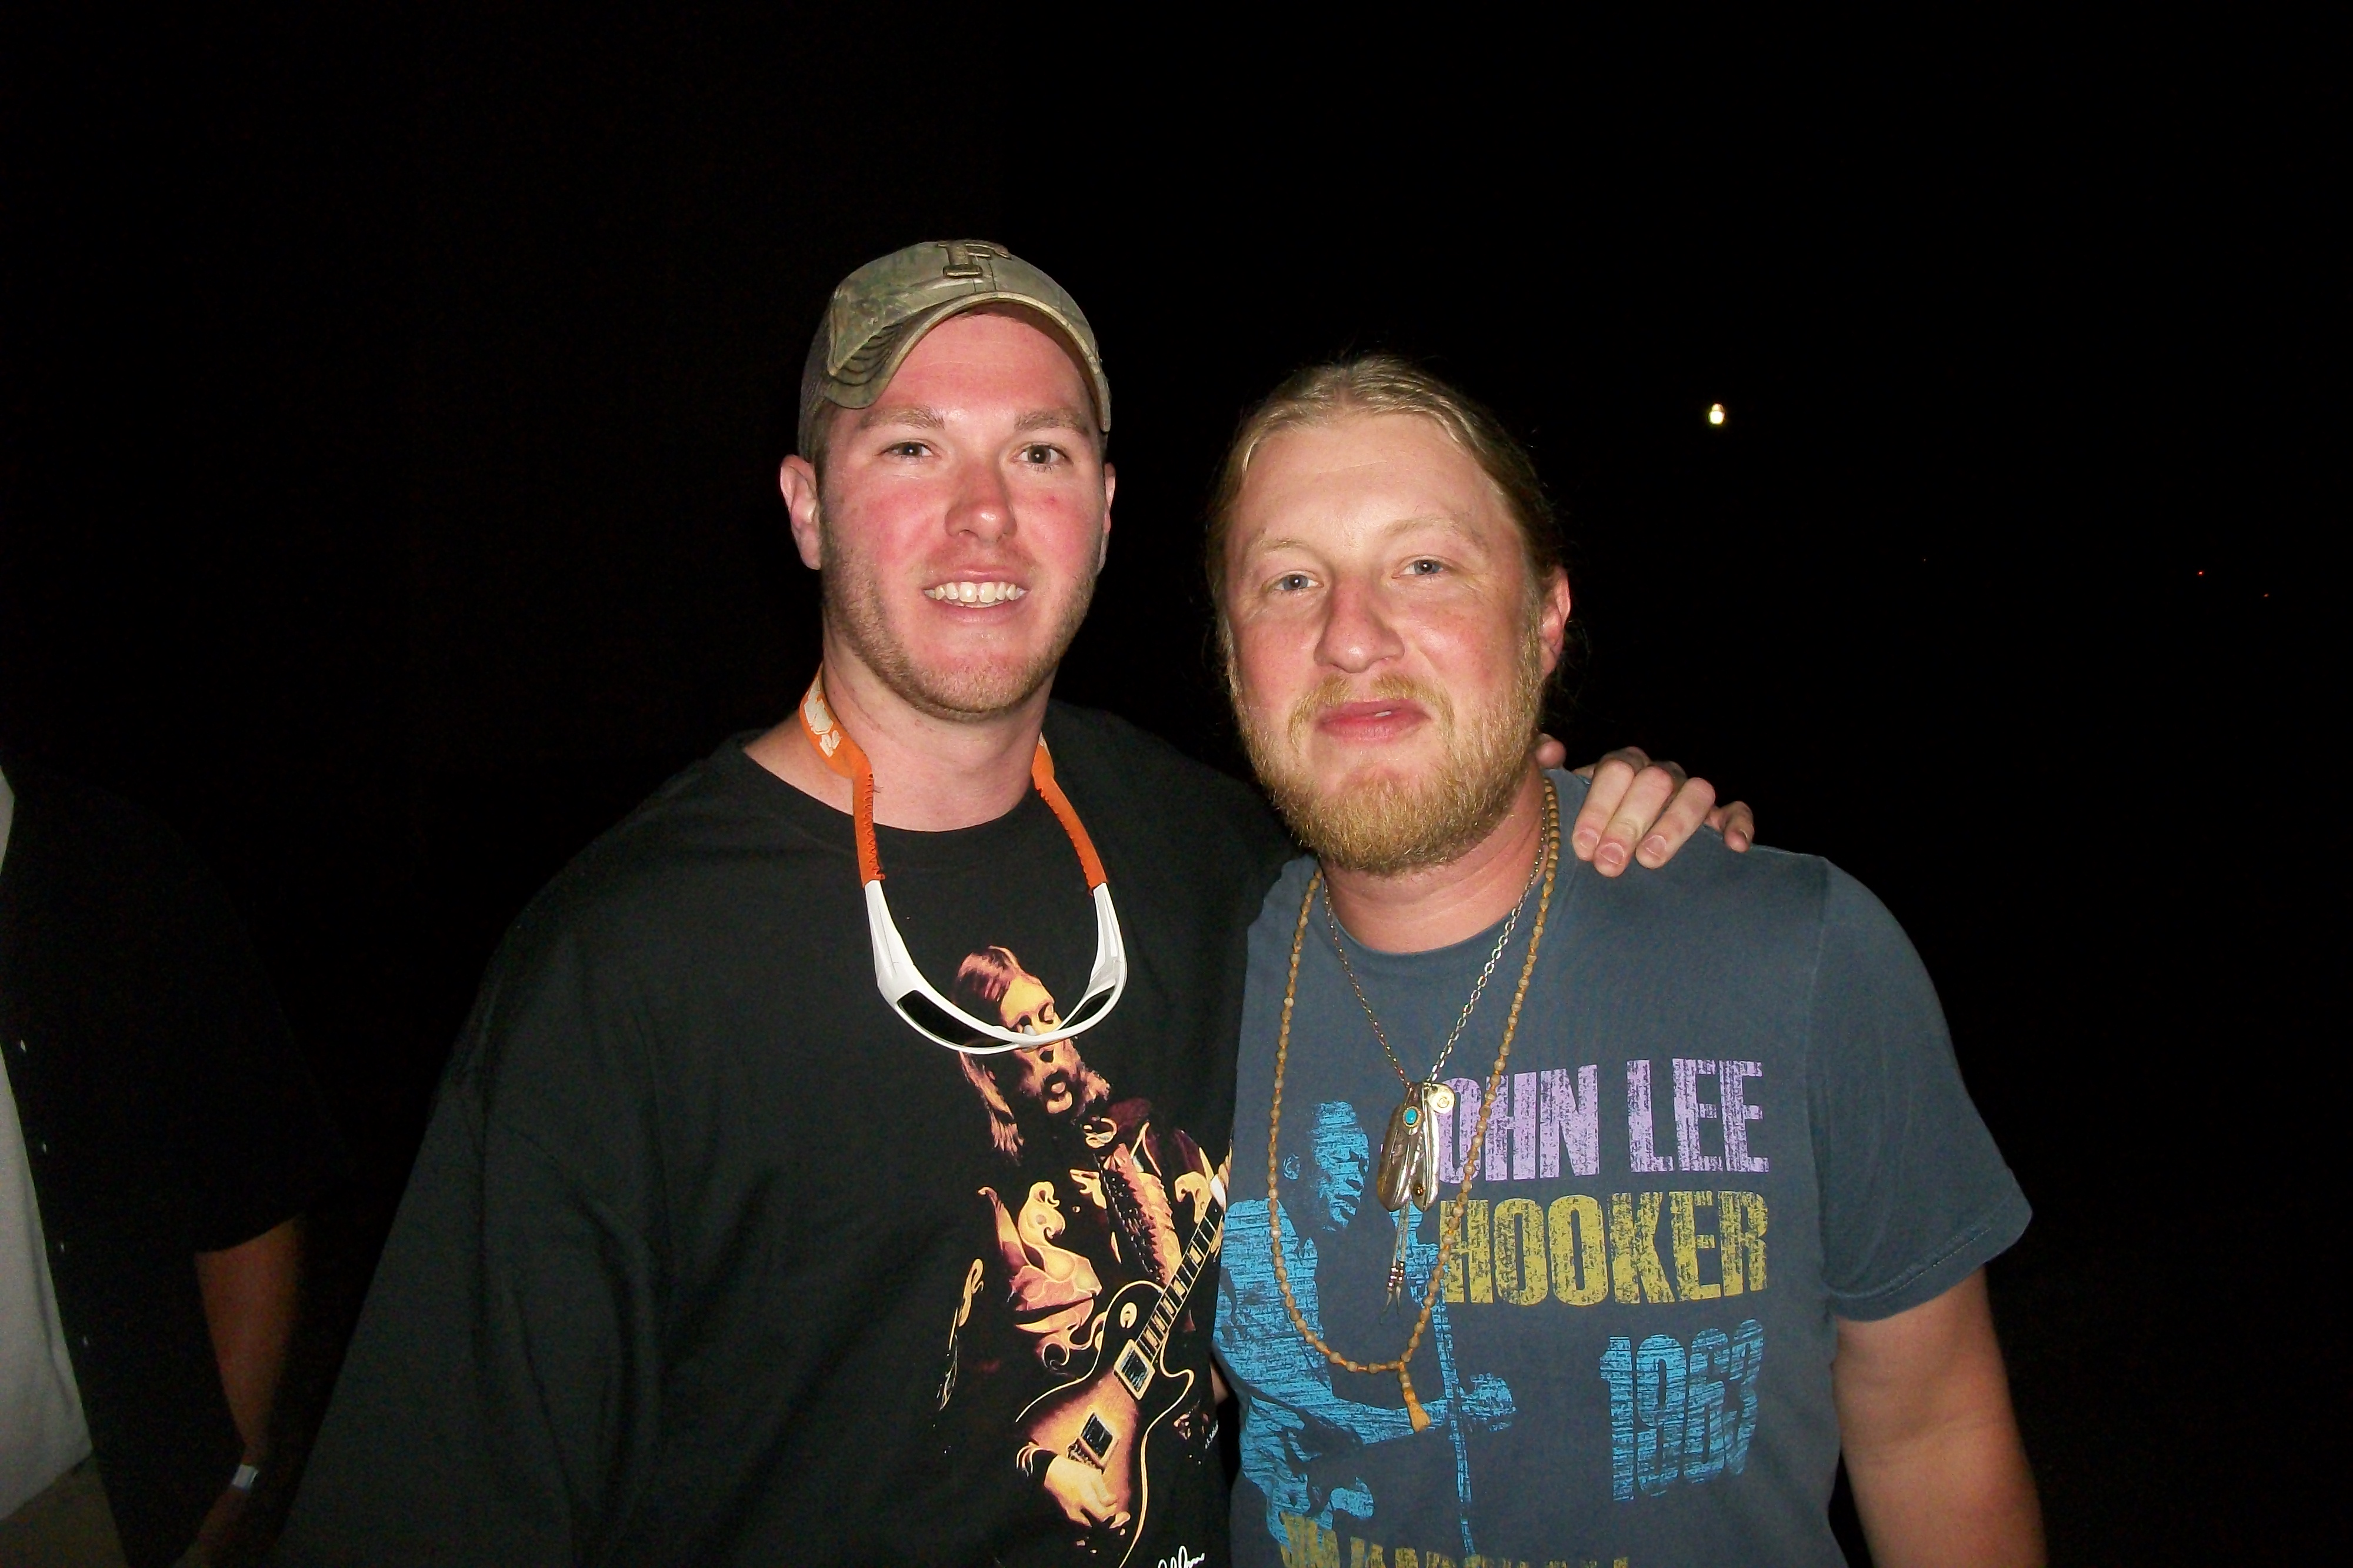 After the Tedeschi Trucks Band show, 6/21/14 in Buffalo NY